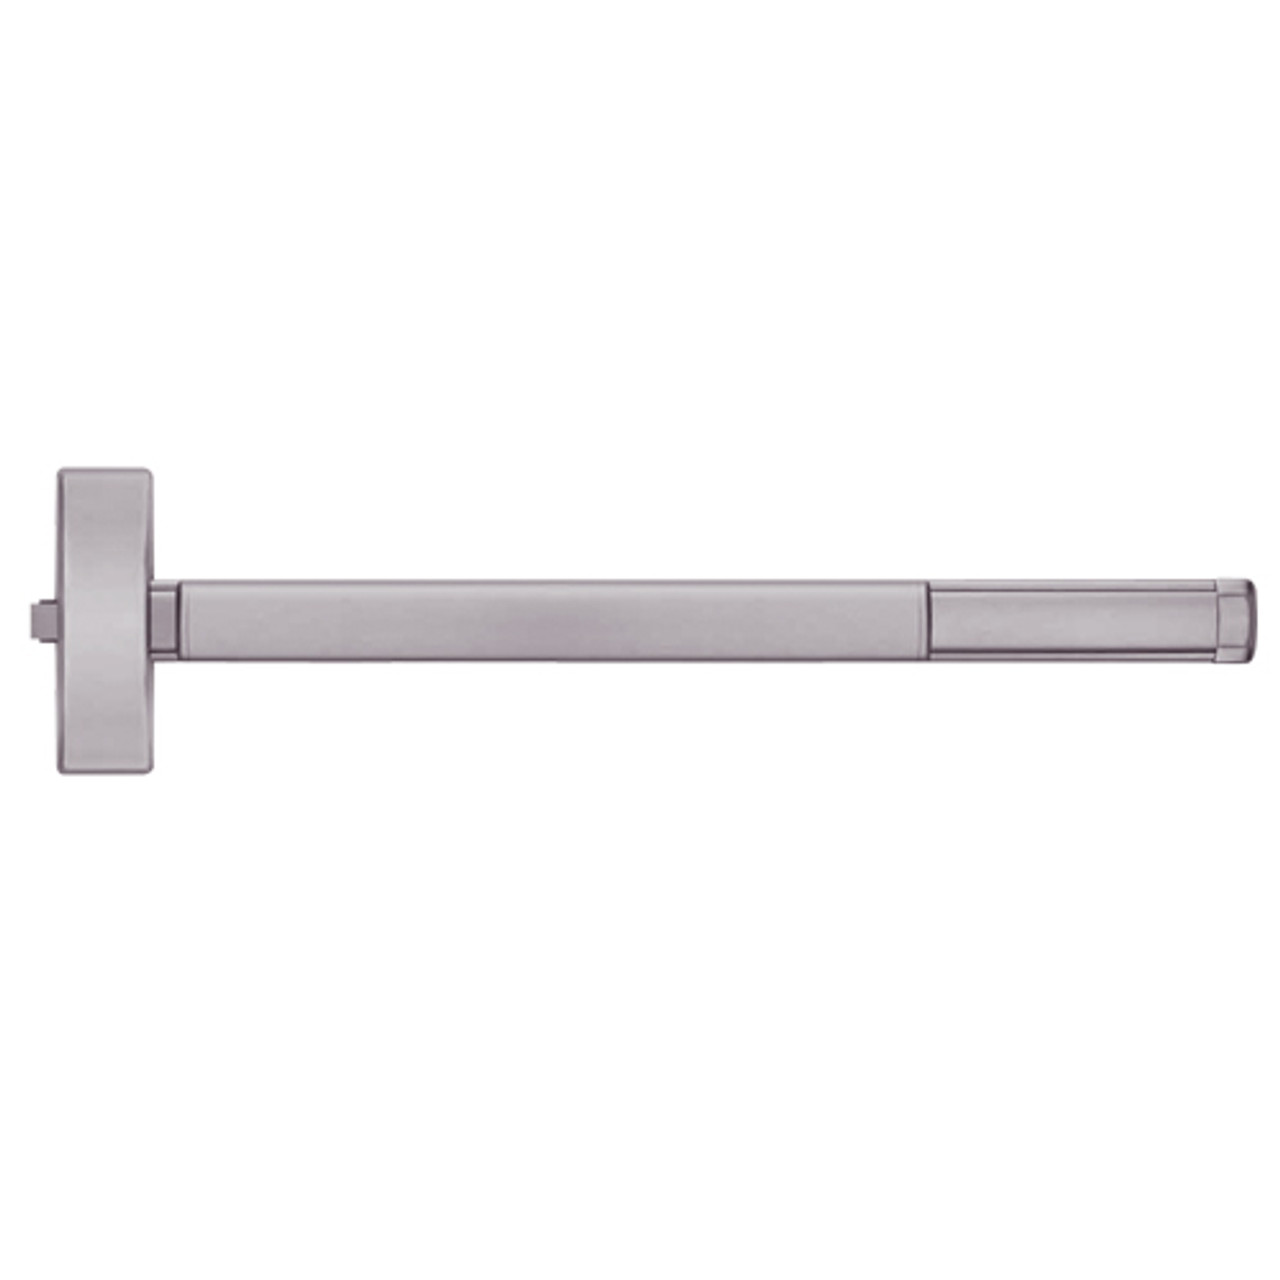 MLR2115-630-48 PHI 2100 Series Non Fire Rated Apex Rim Exit Device with Motorized Latch Retraction Prepped for Thumb Piece Always Active in Satin Stainless Steel Finish